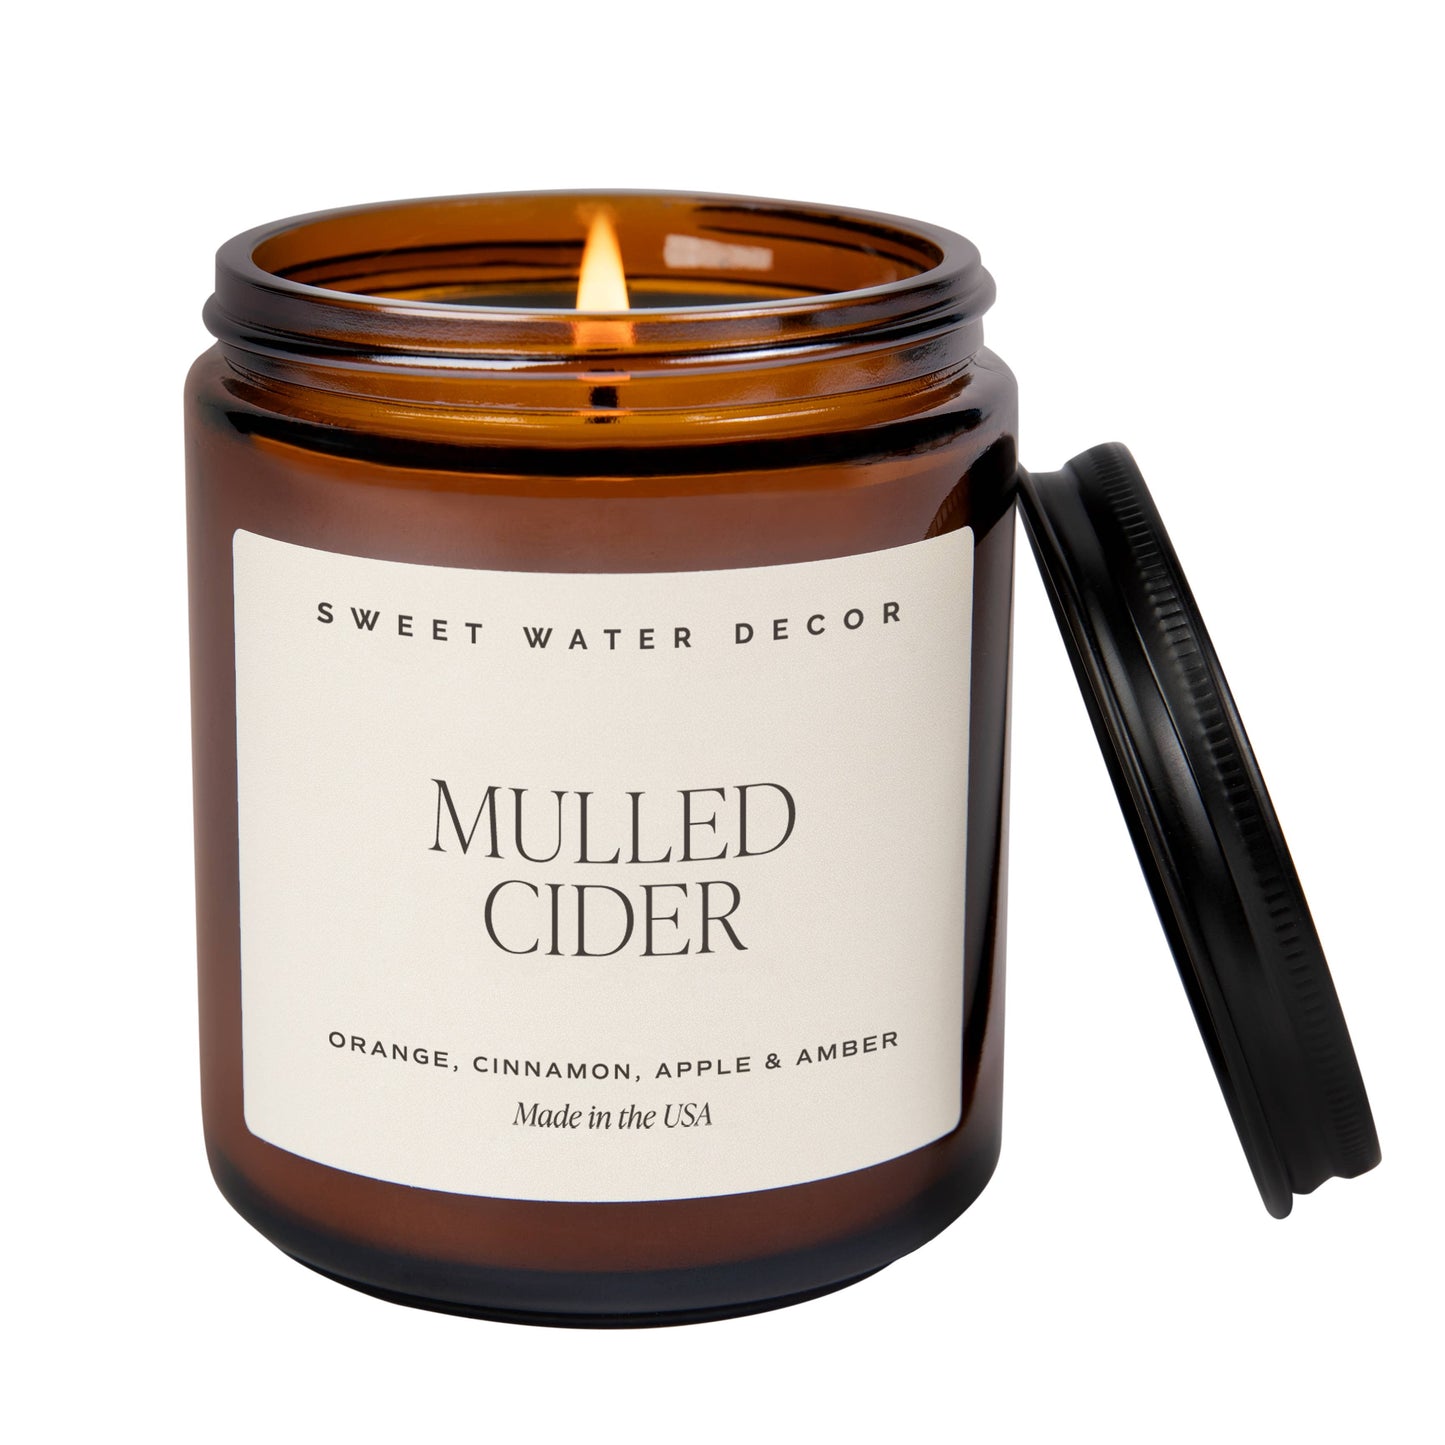 *NEW* Mulled Cider 9 oz Soy Candle